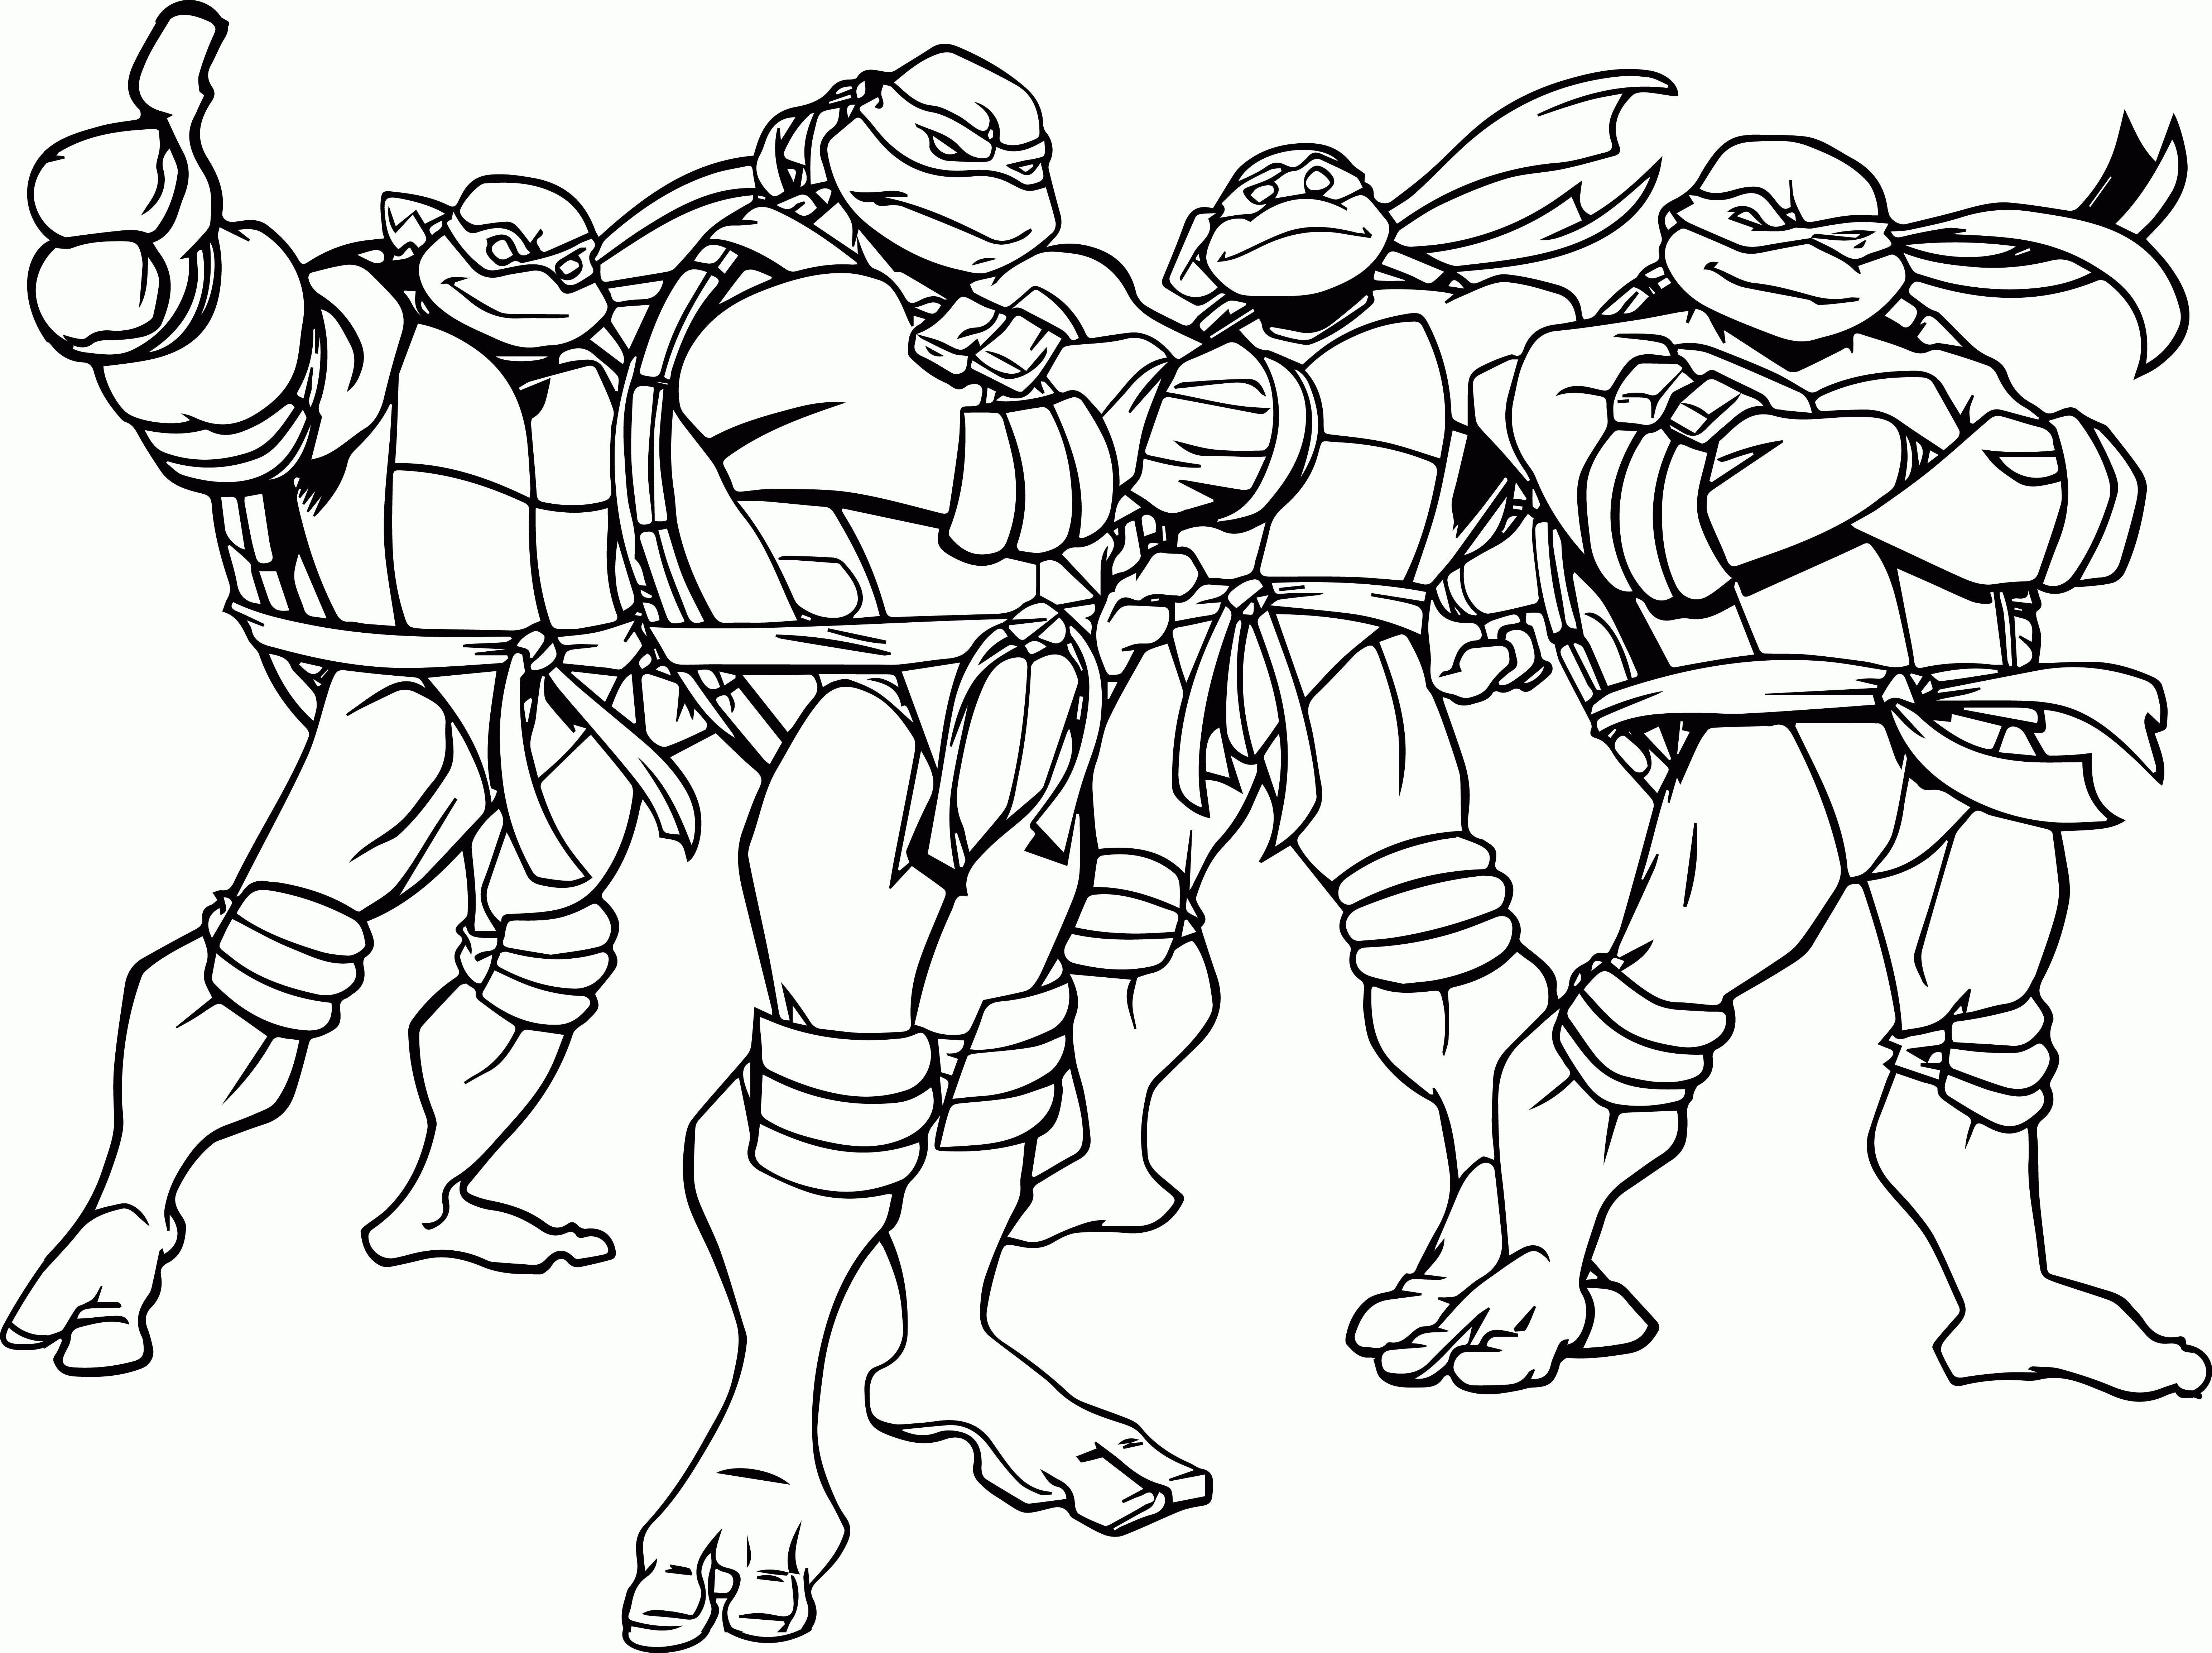 4 Ninja Turtles Coloring Page - Coloring Pages For All Ages - Coloring Home